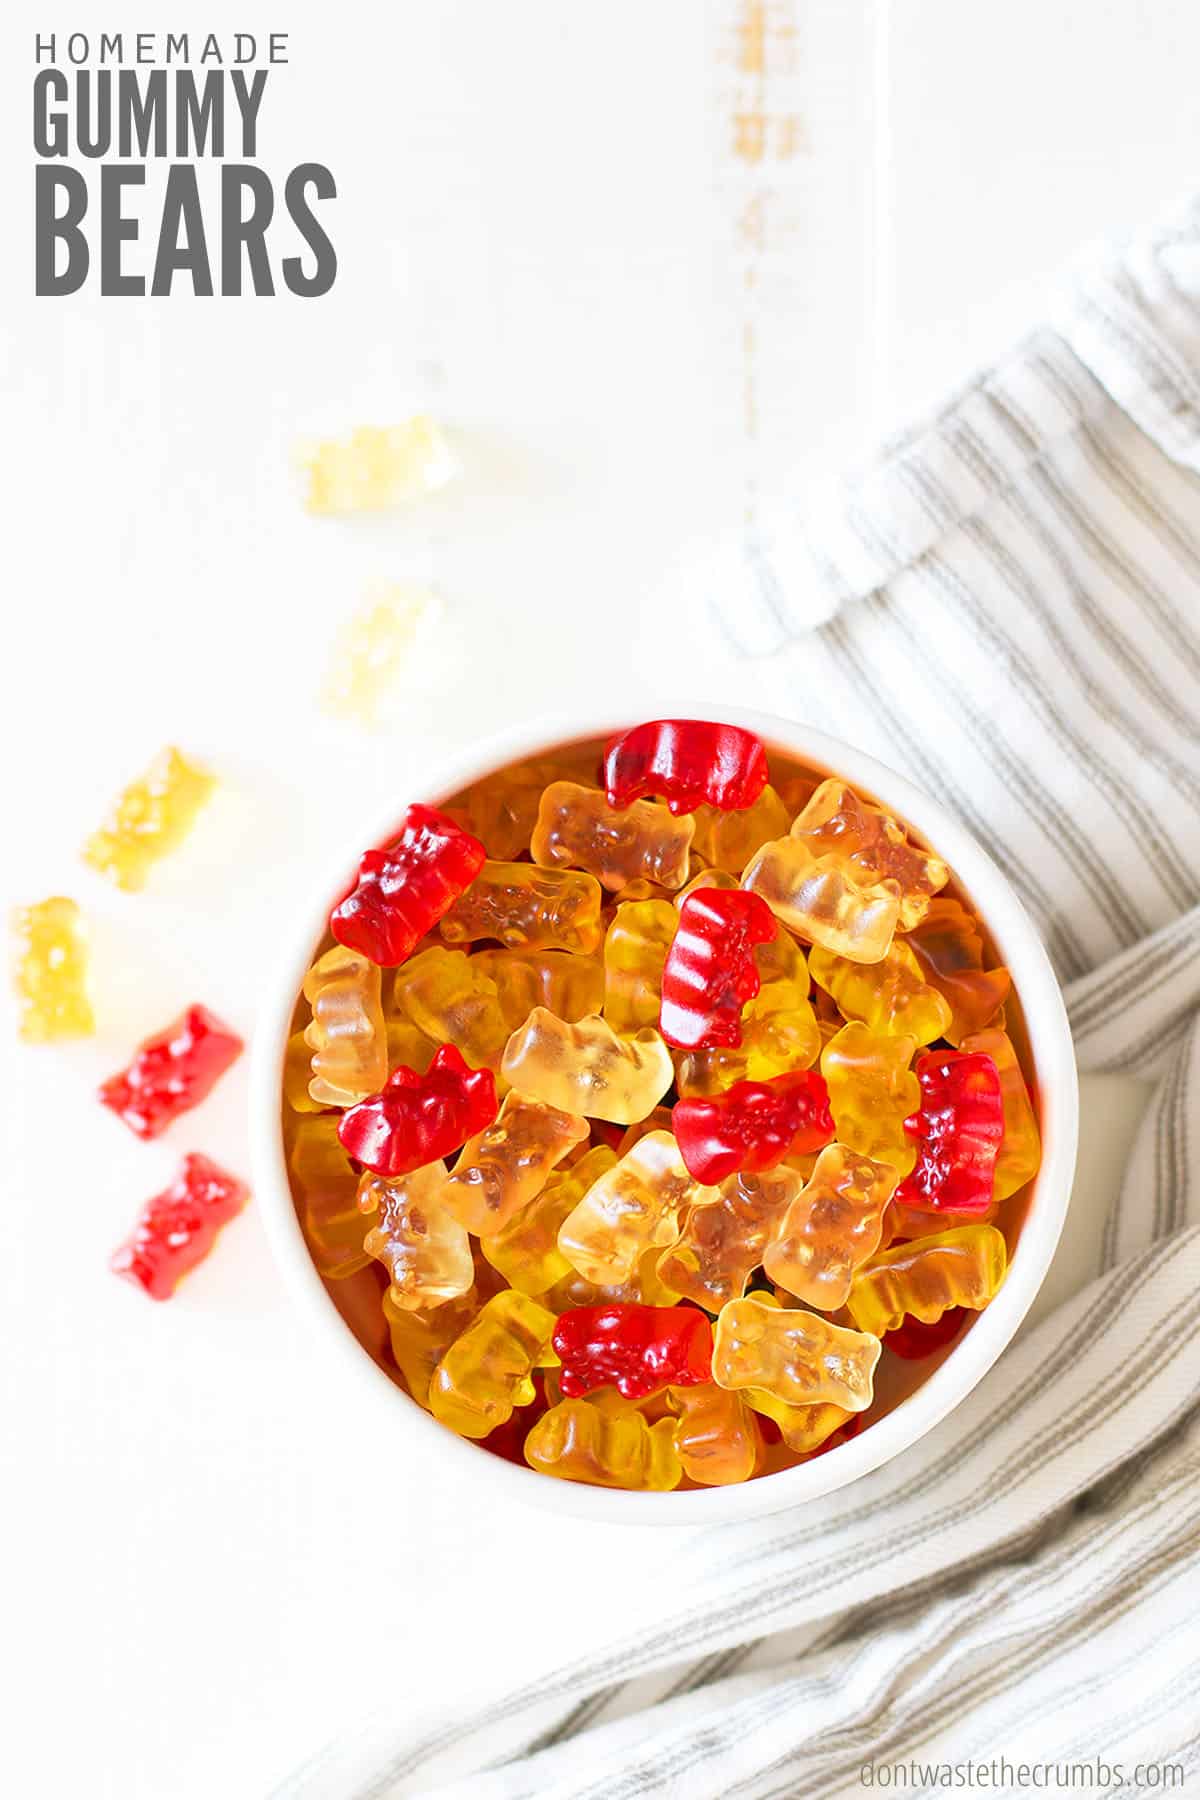 Text overlay Homemade Gummy Bears. Image showing bowl of healthy homemade gummies. Try out this gummy bear recipe.